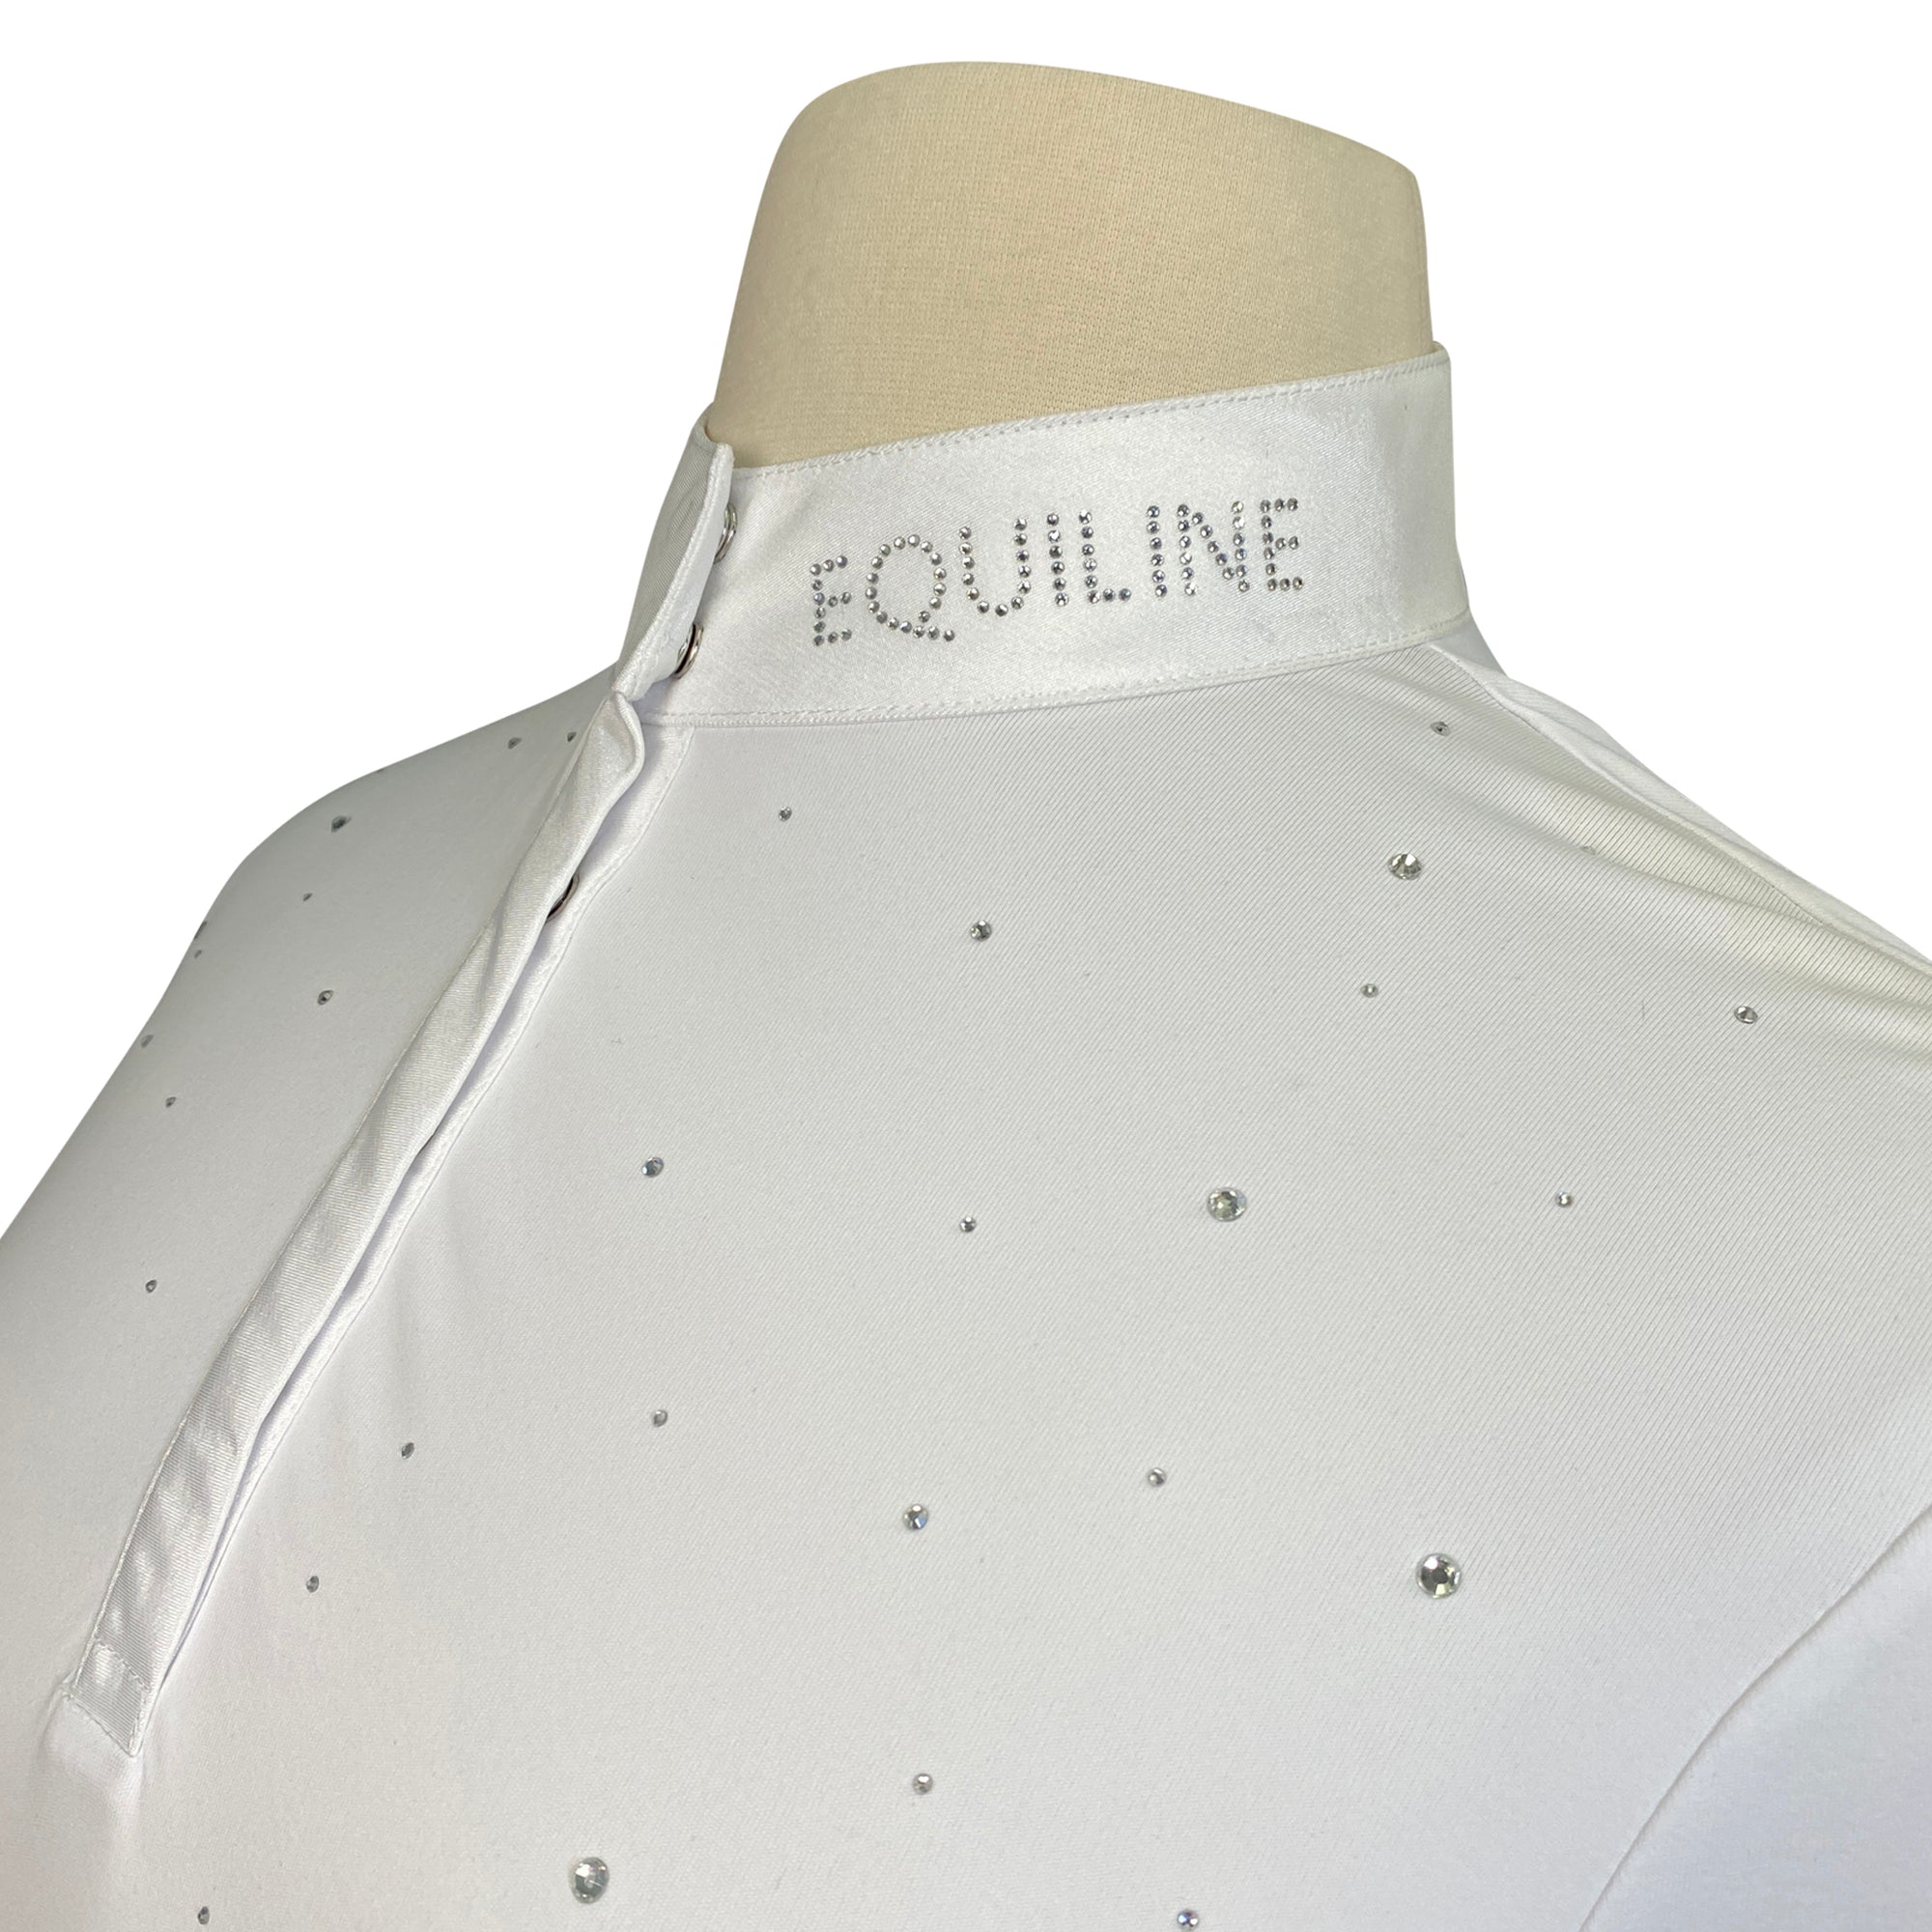 Equiline 'Guarde Blinged Out' Long Sleeve Show Shirt in White